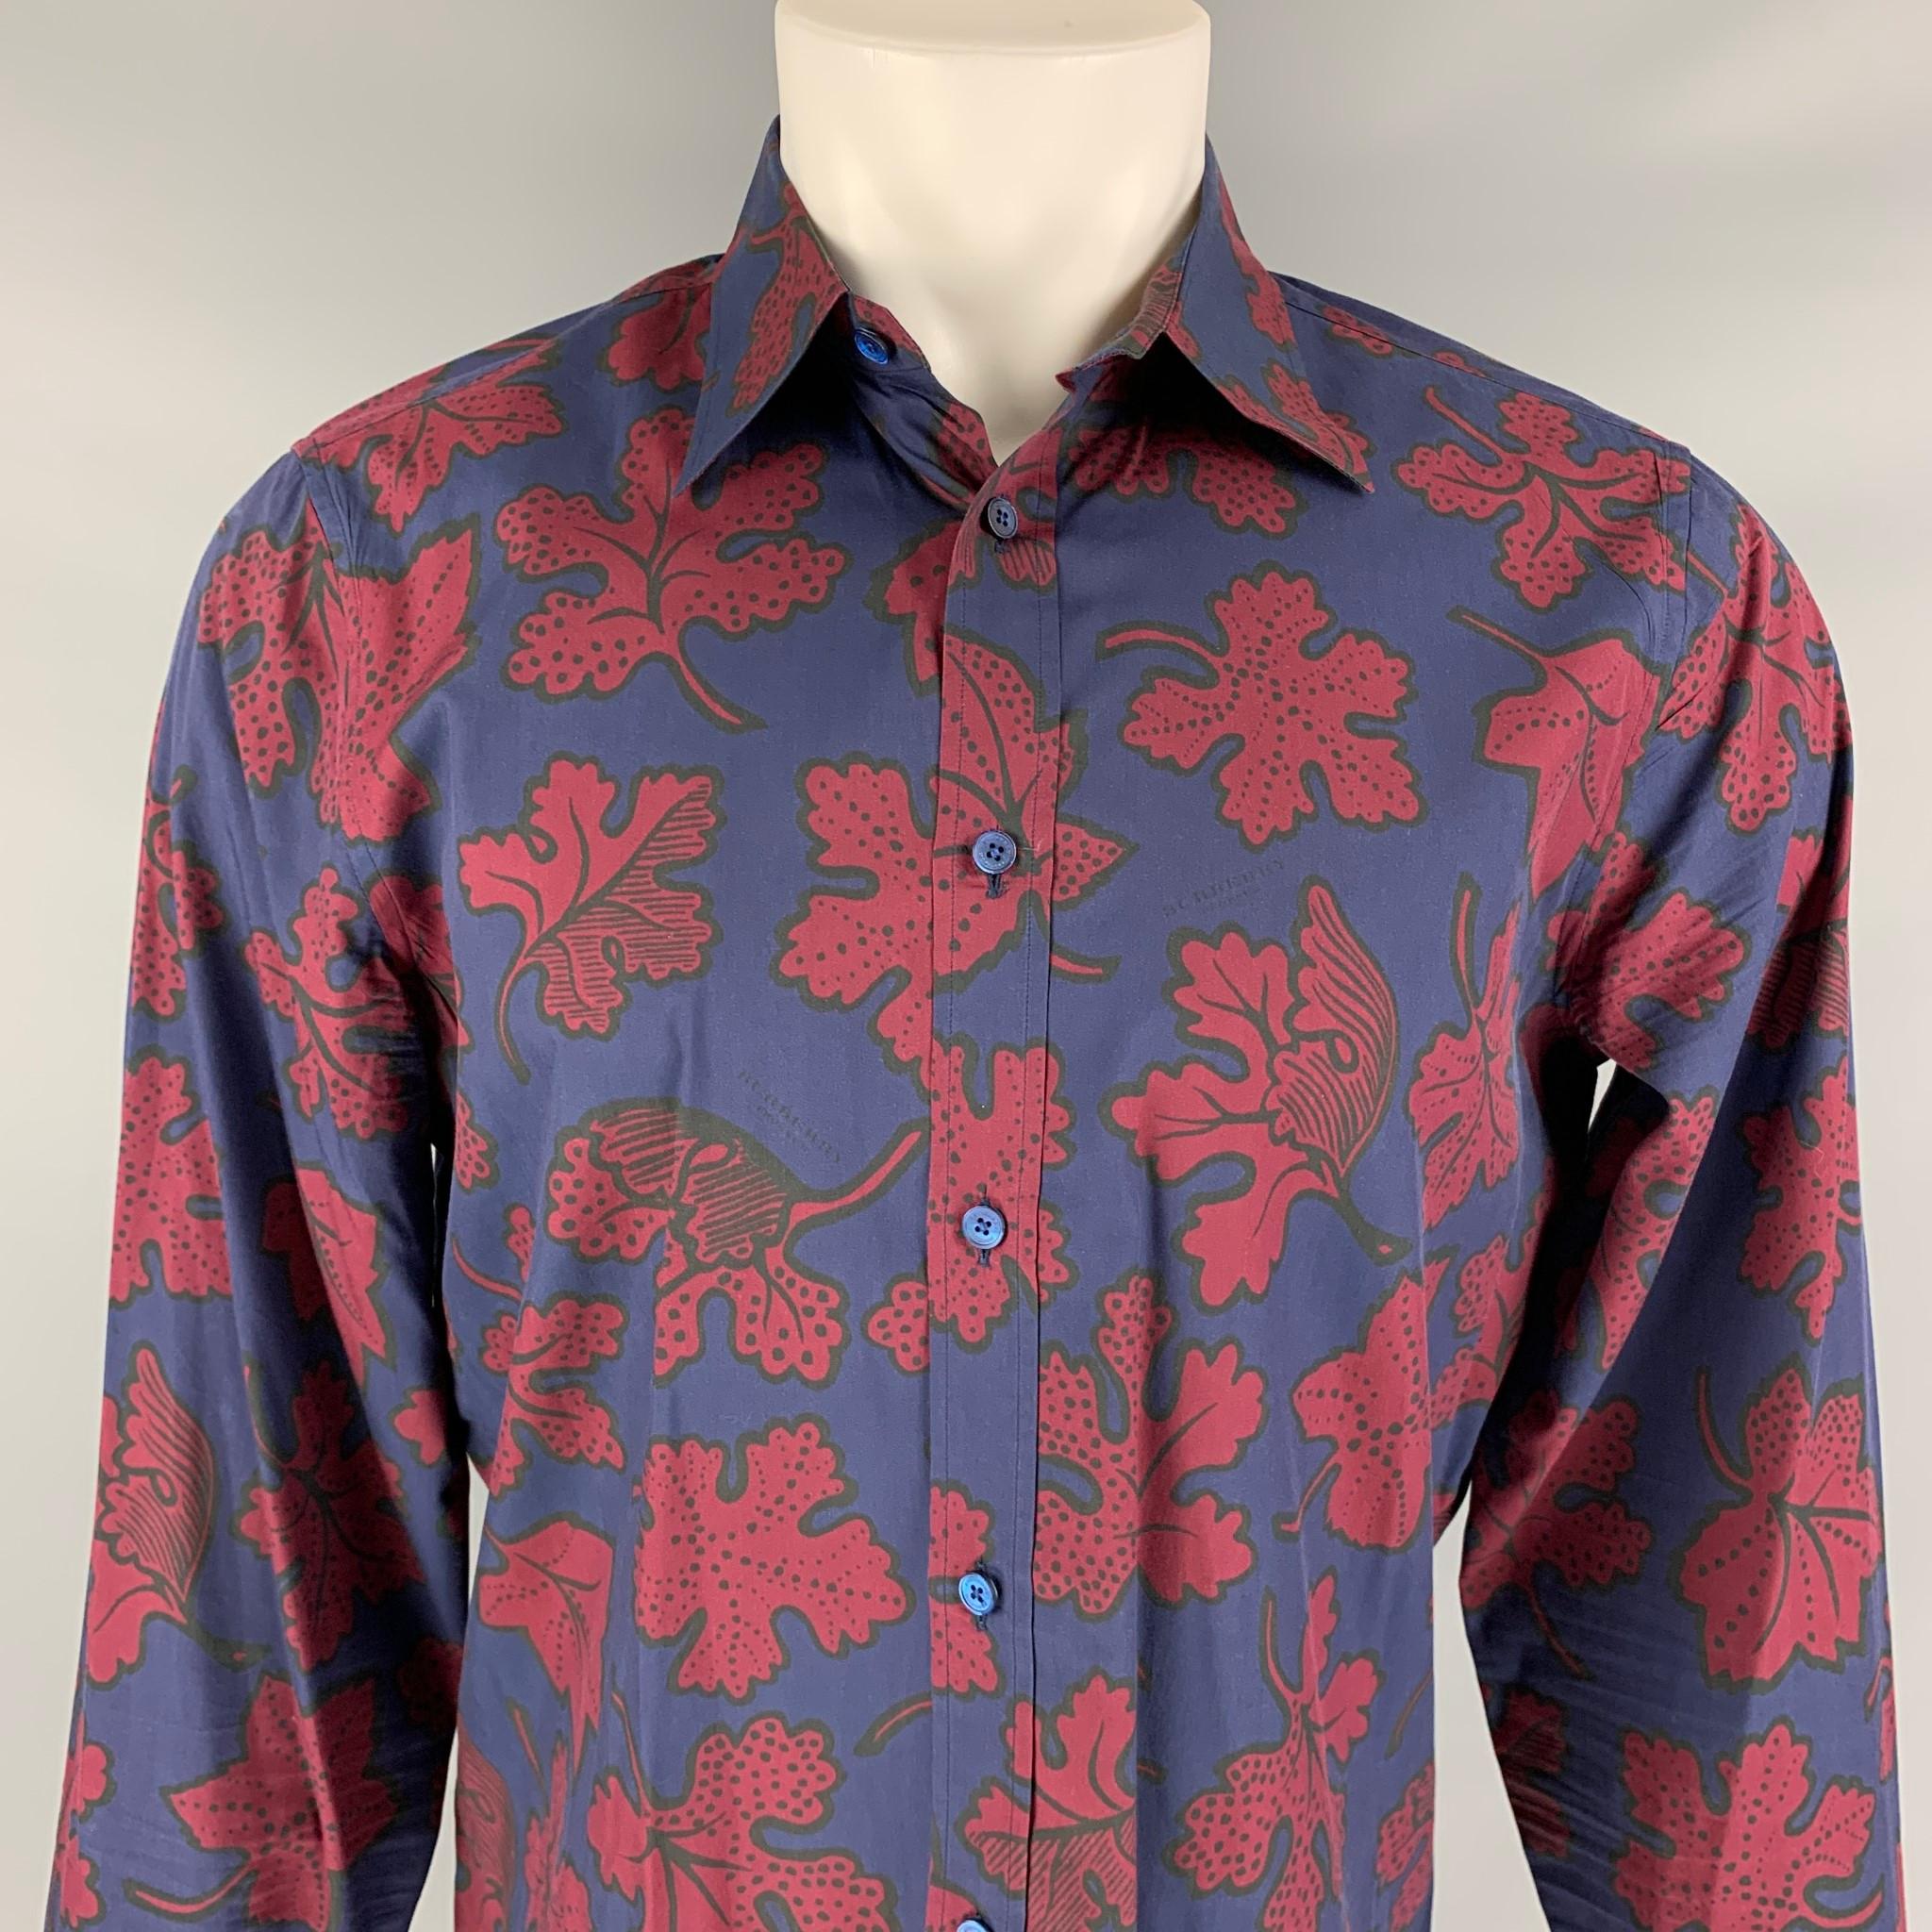 BURBERRY PRORSUM Fall 2014 long sleeve shirt comes in a navy & burgundy leaf print cotton featuring a spread collar and a button up closure. Made in Italy.

Very Good Pre-Owned Condition.
Marked: 15/40

Measurements:

Shoulder: 17.5 in.
Chest: 42